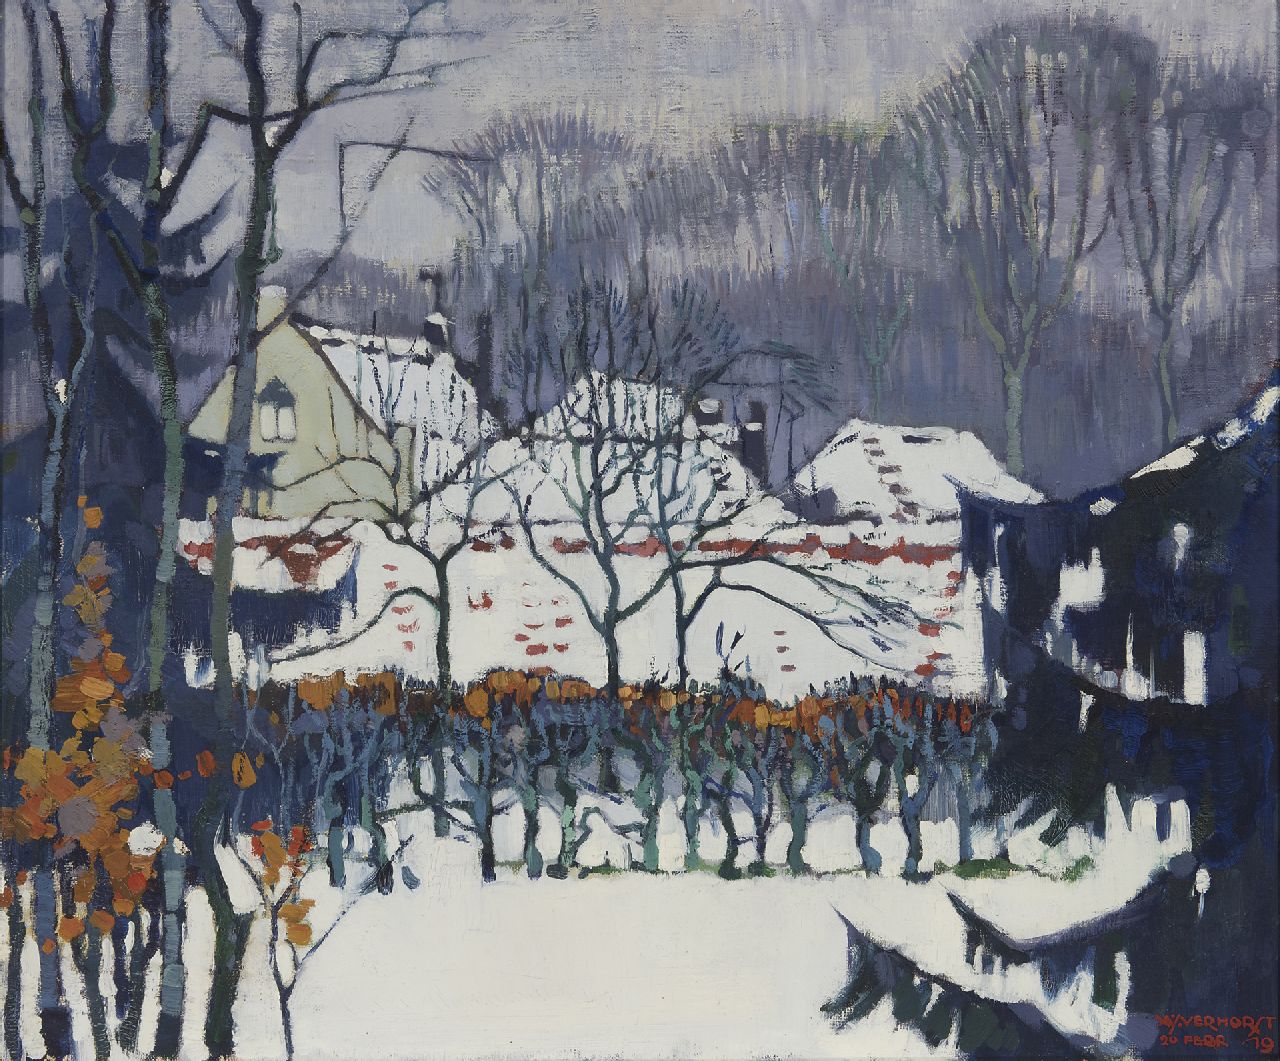 Verhorst A.J.  | Andreas Jacobus 'André J.' Verhorst, A winter garden, oil on canvas 55.2 x 66.3 cm, signed l.r. and dated 20 febr. '19